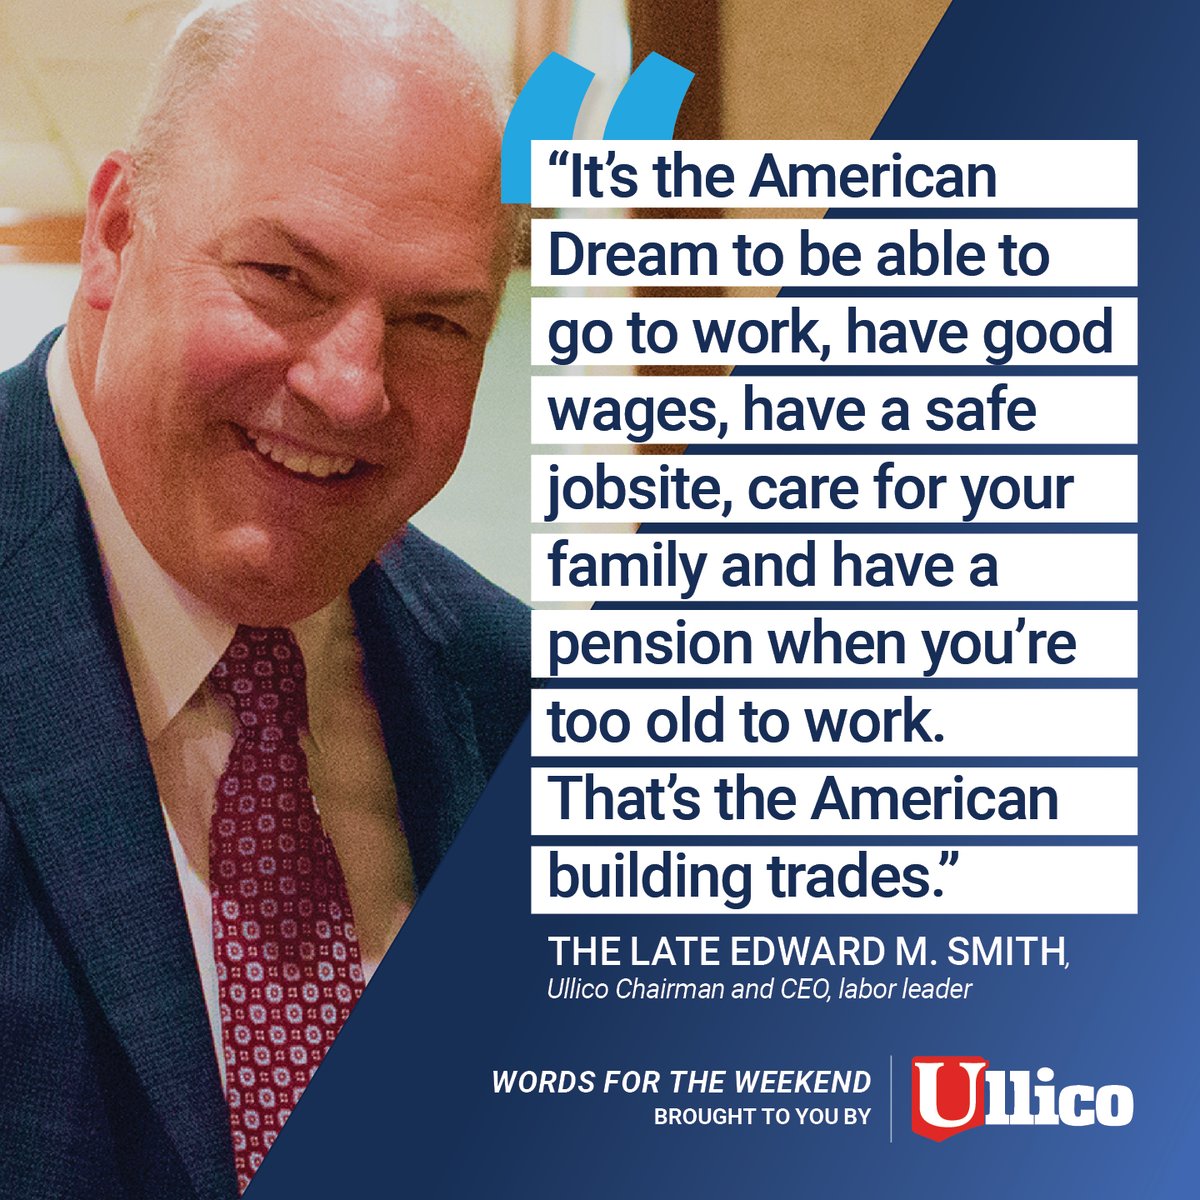 It's Words for the Weekend, brought to you by the #union movement's company. #unionstrong #nabtu